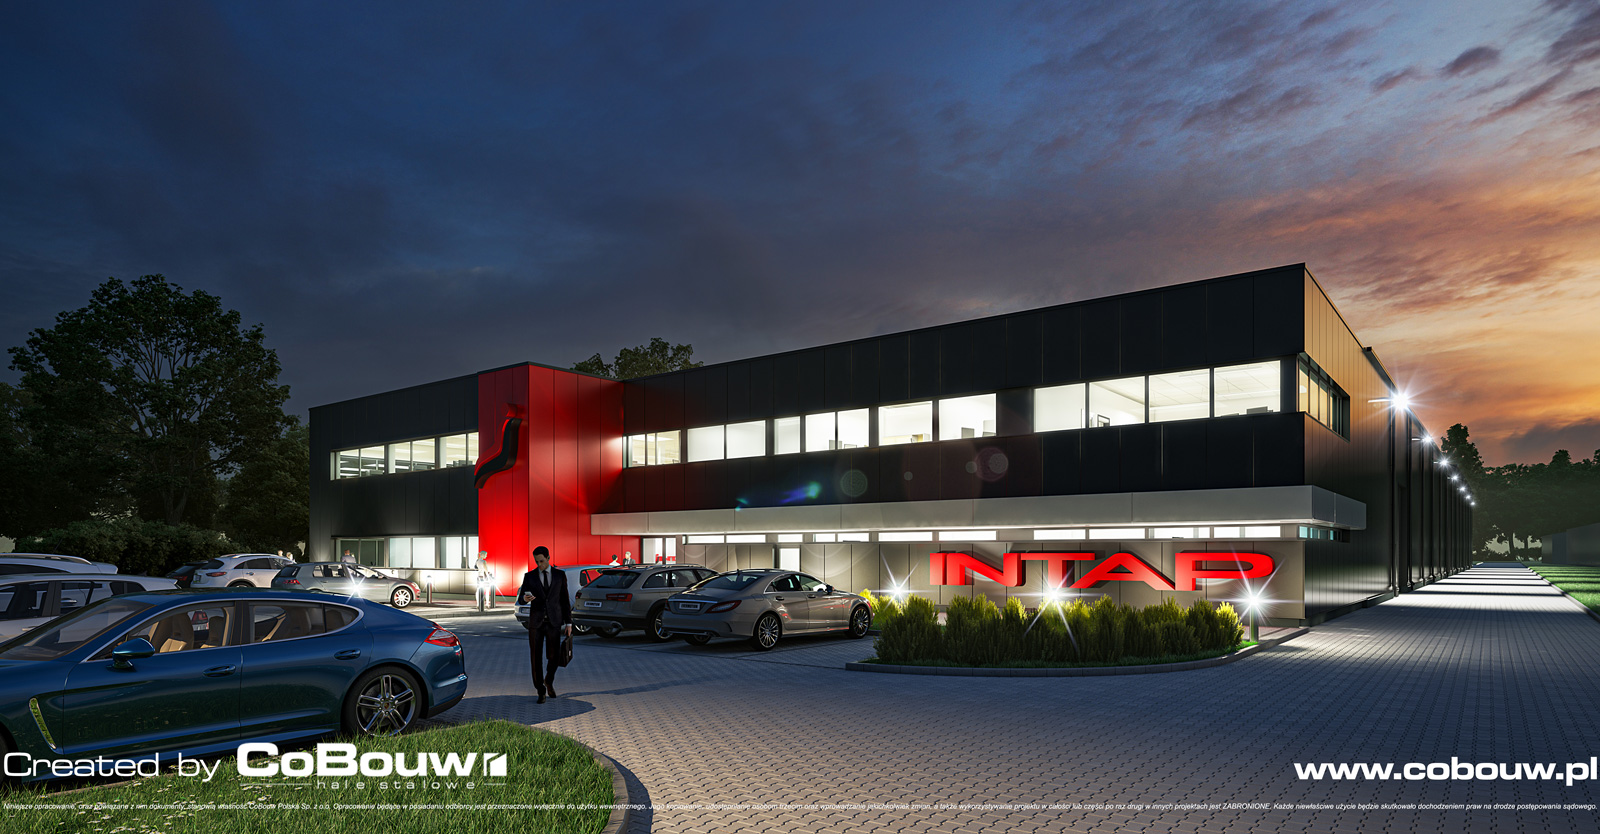 night view, visualization of the Intap investment - industrial facility for a bus seats manufacturer, Bukowiec, lodzkie province